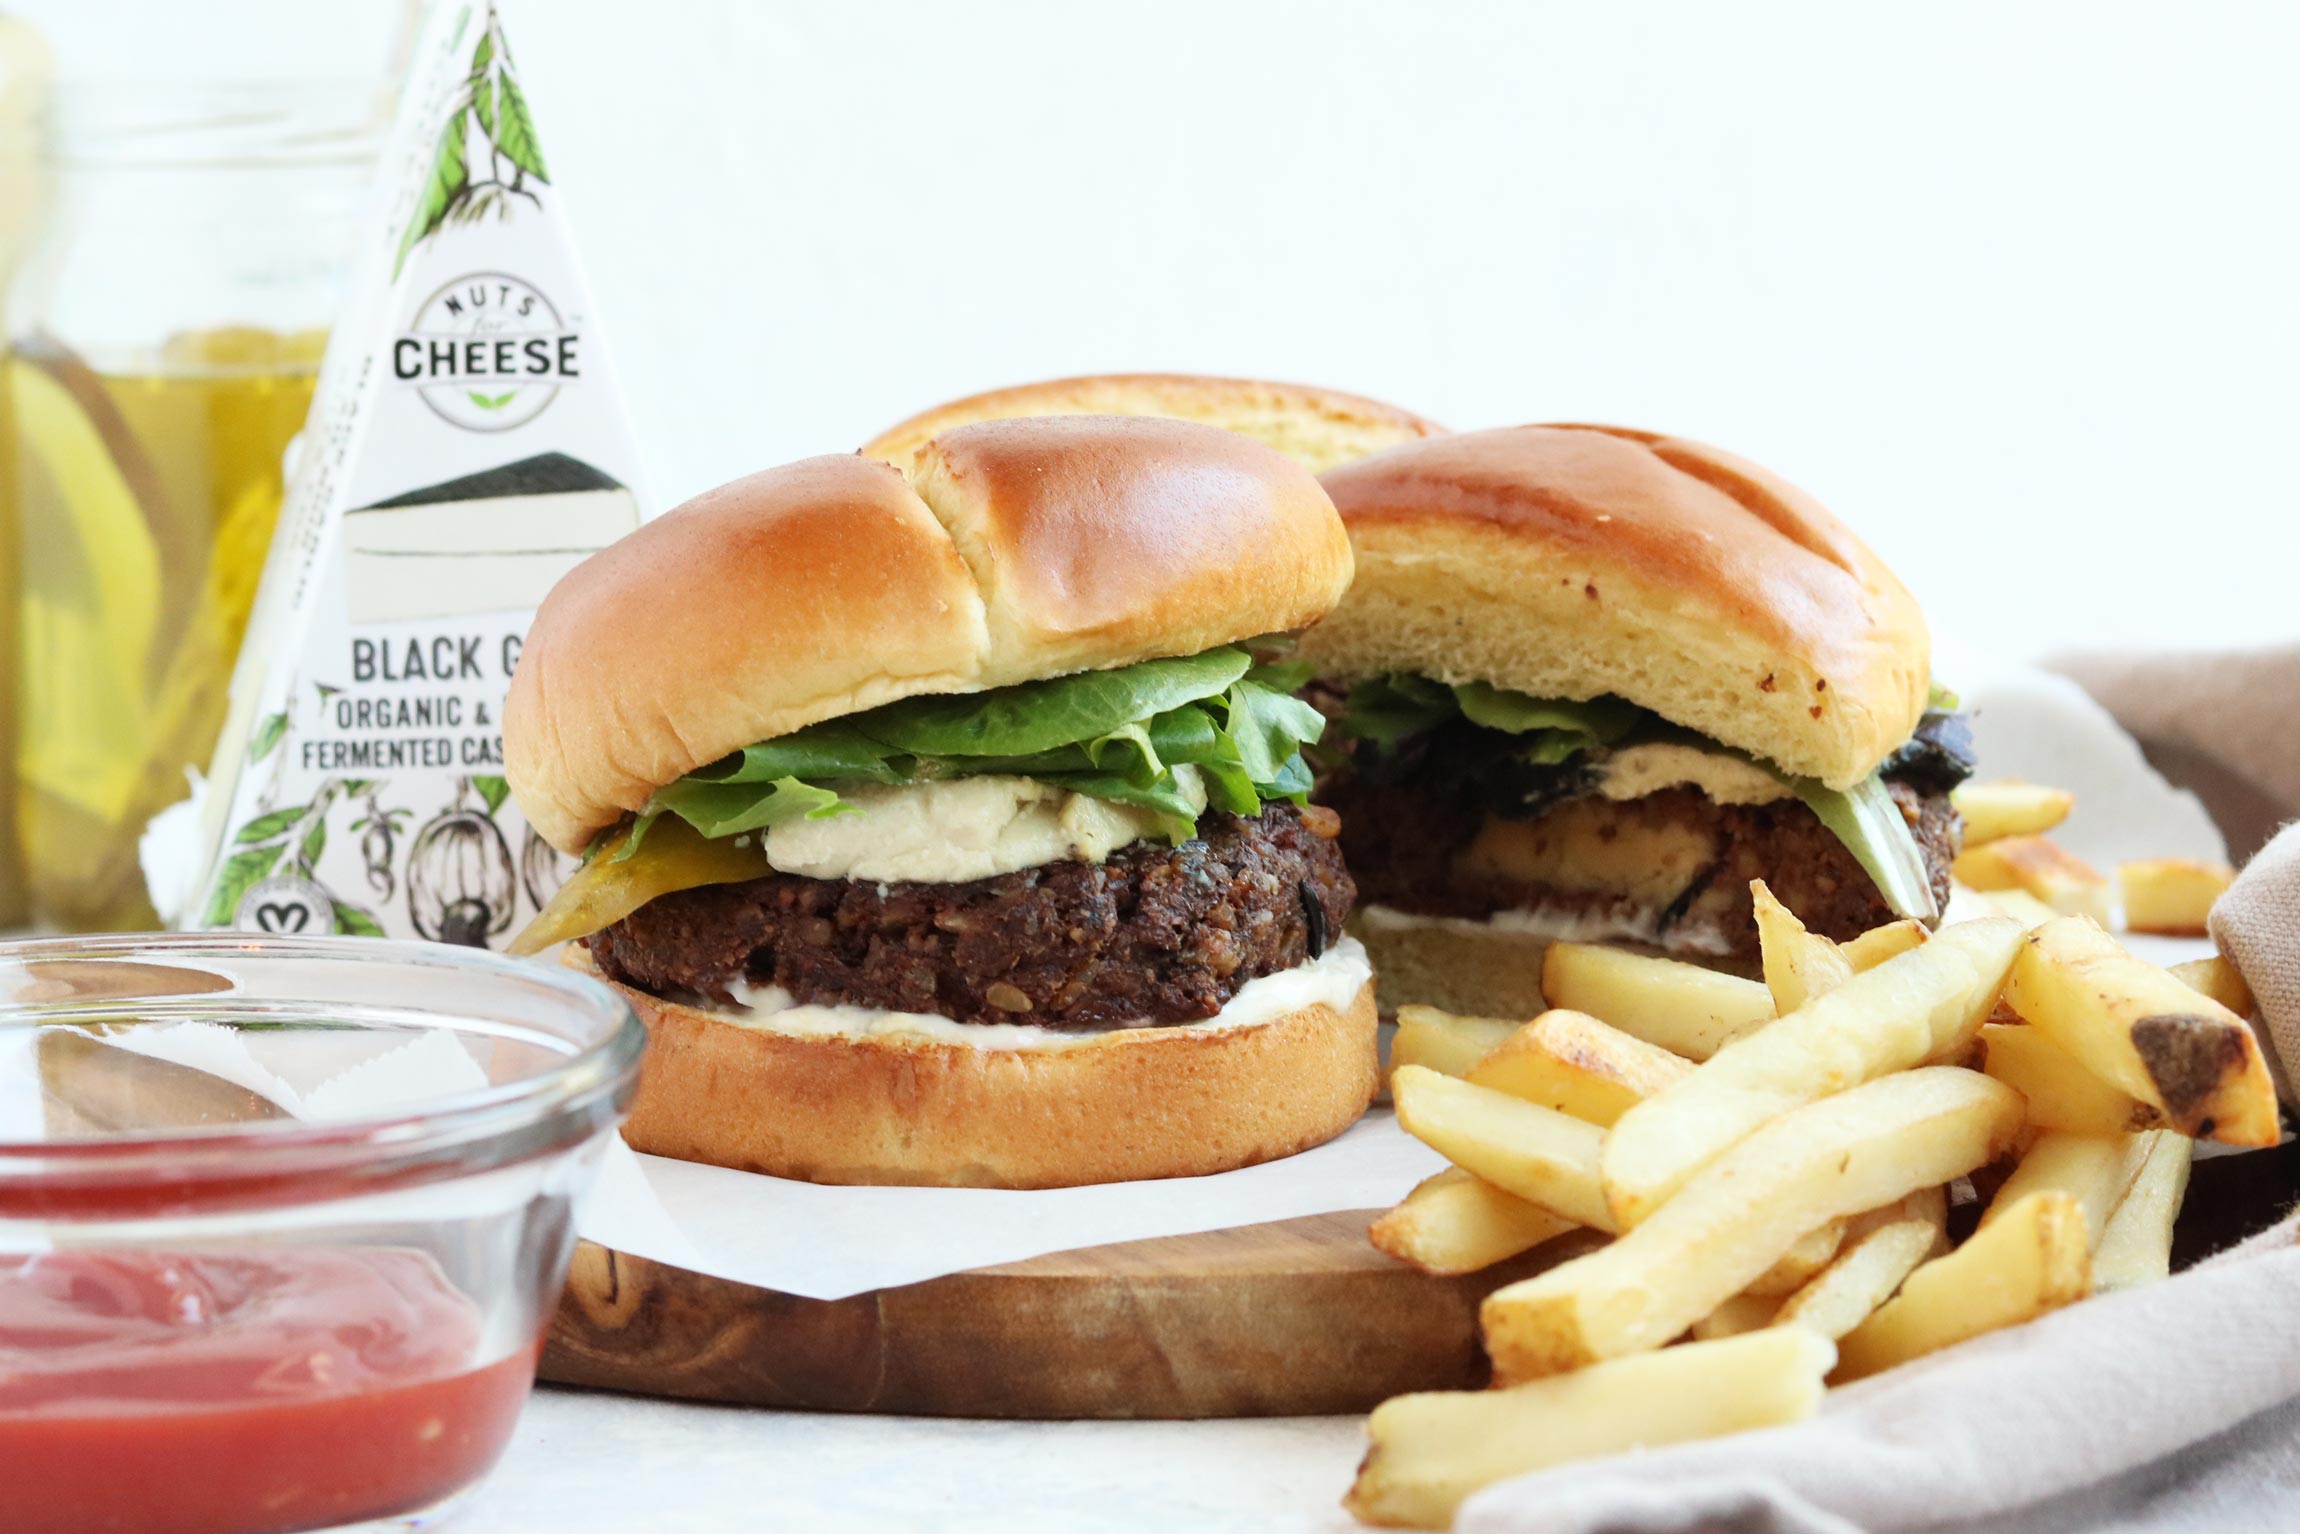 Prepared burgers on a plate, stuffed with dairy-free black garlic cheese and topped with lettuce. Served with fries and beside a box of dairy-free black garlic cheese.